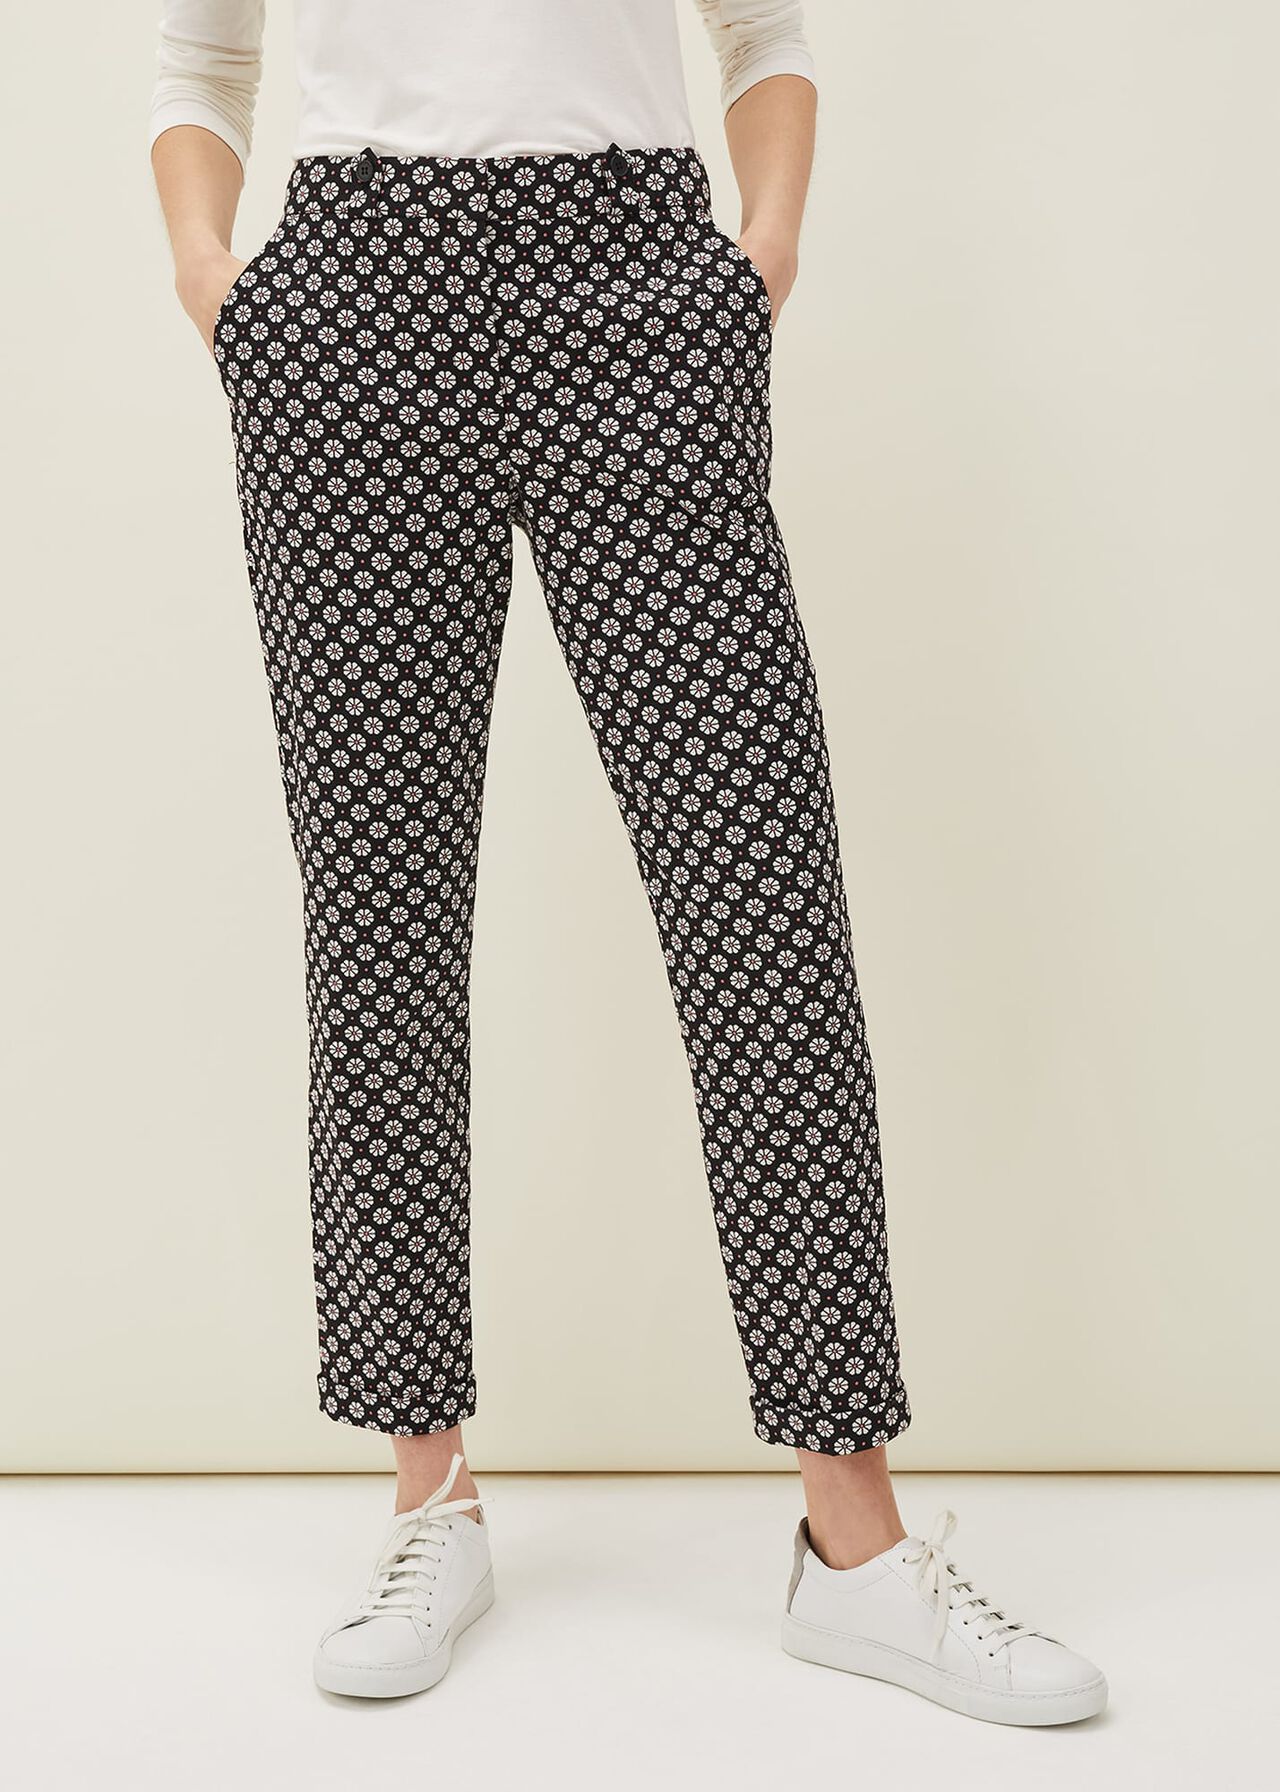 Ryleigh Geometric Print Tapered Trouser | Phase Eight UK